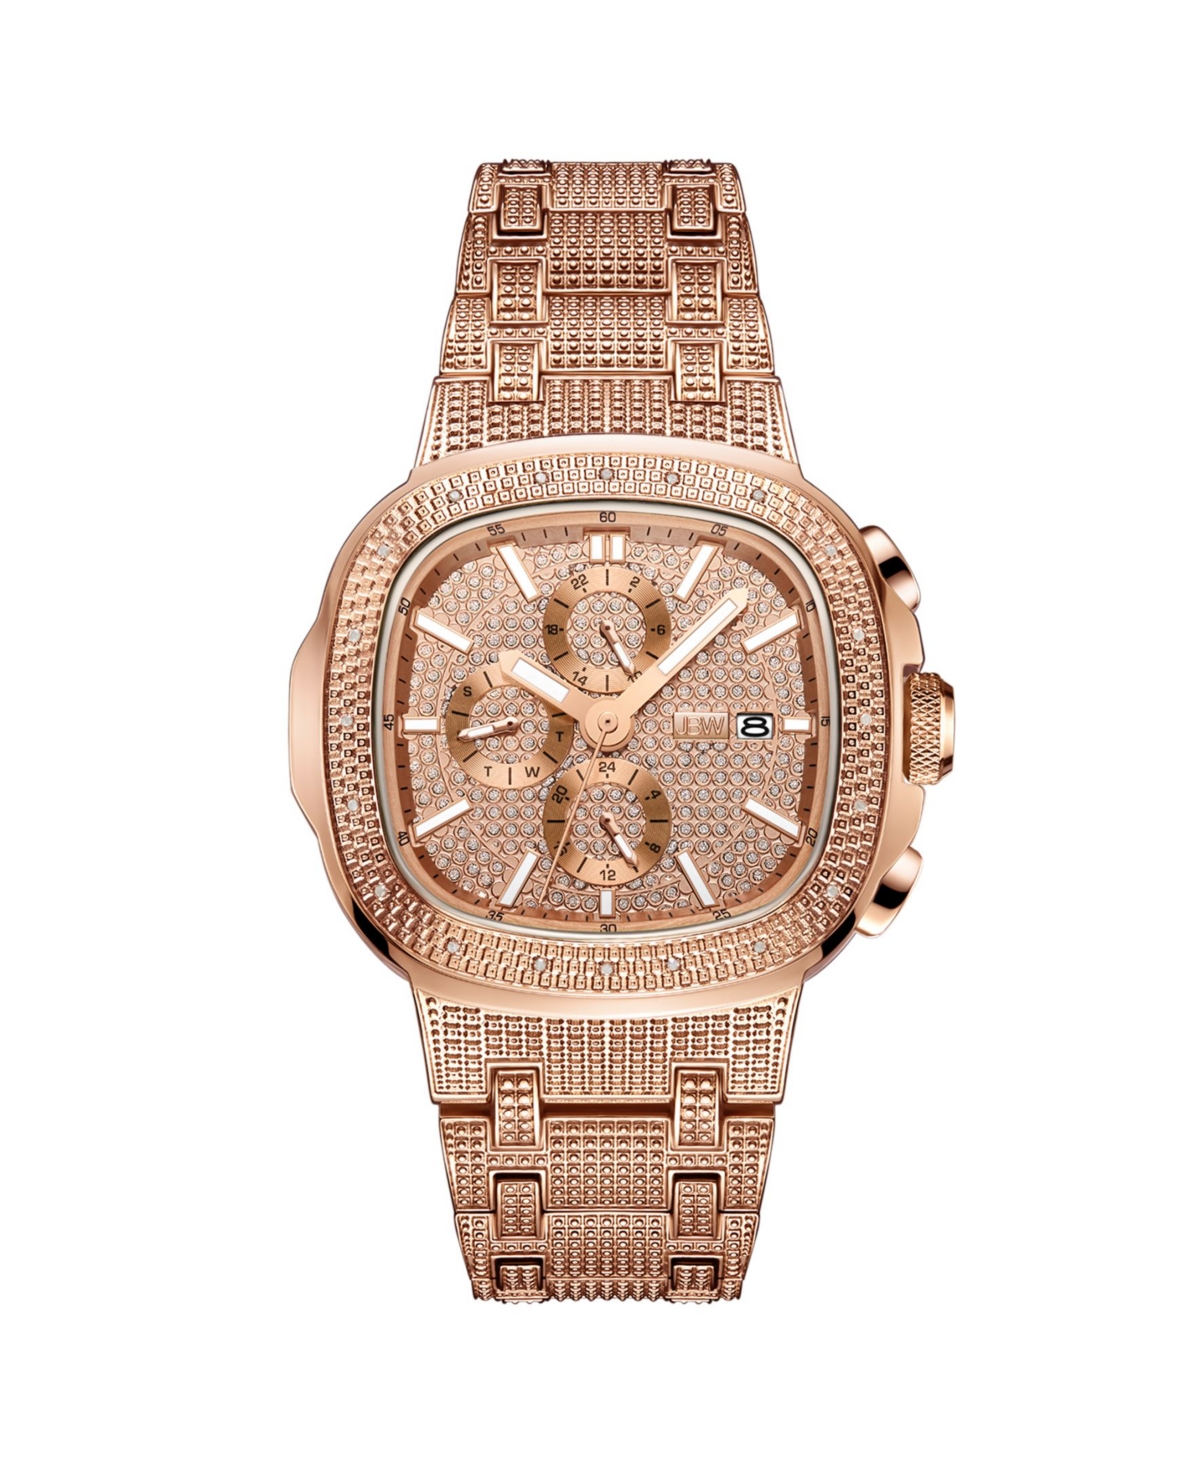 Jbw Men's Diamond (1/5 ct. t.w.) Watch in 18k Rose Gold-plated Stainless-steel Watch 48mm